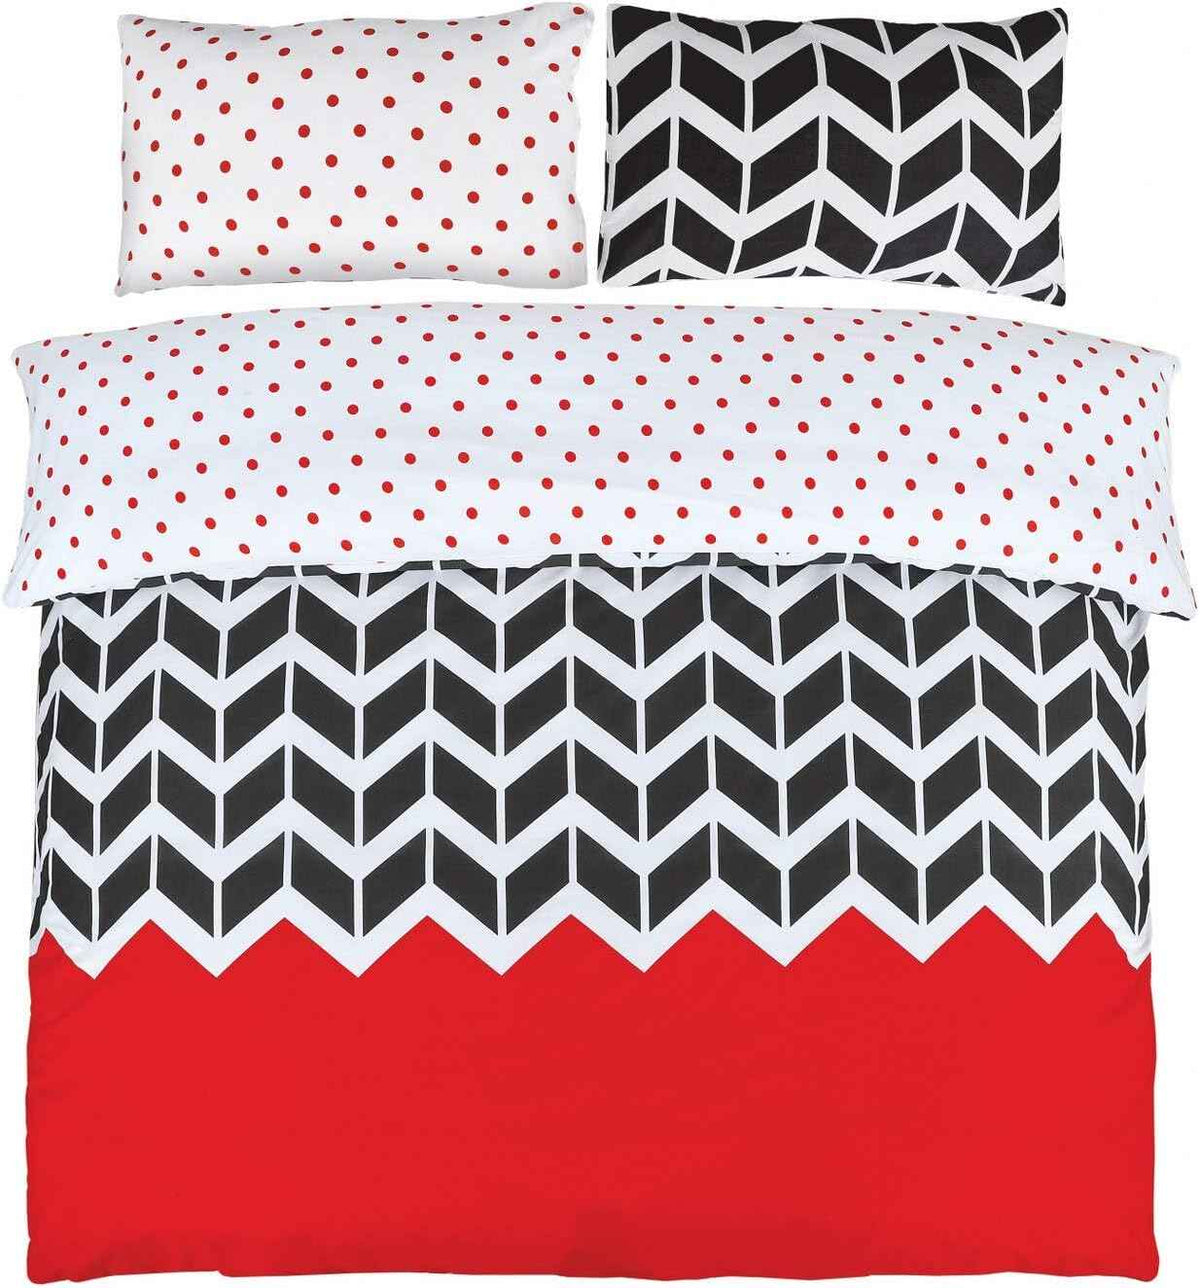  Black and Red Duvet Cover - Chevron Printed set